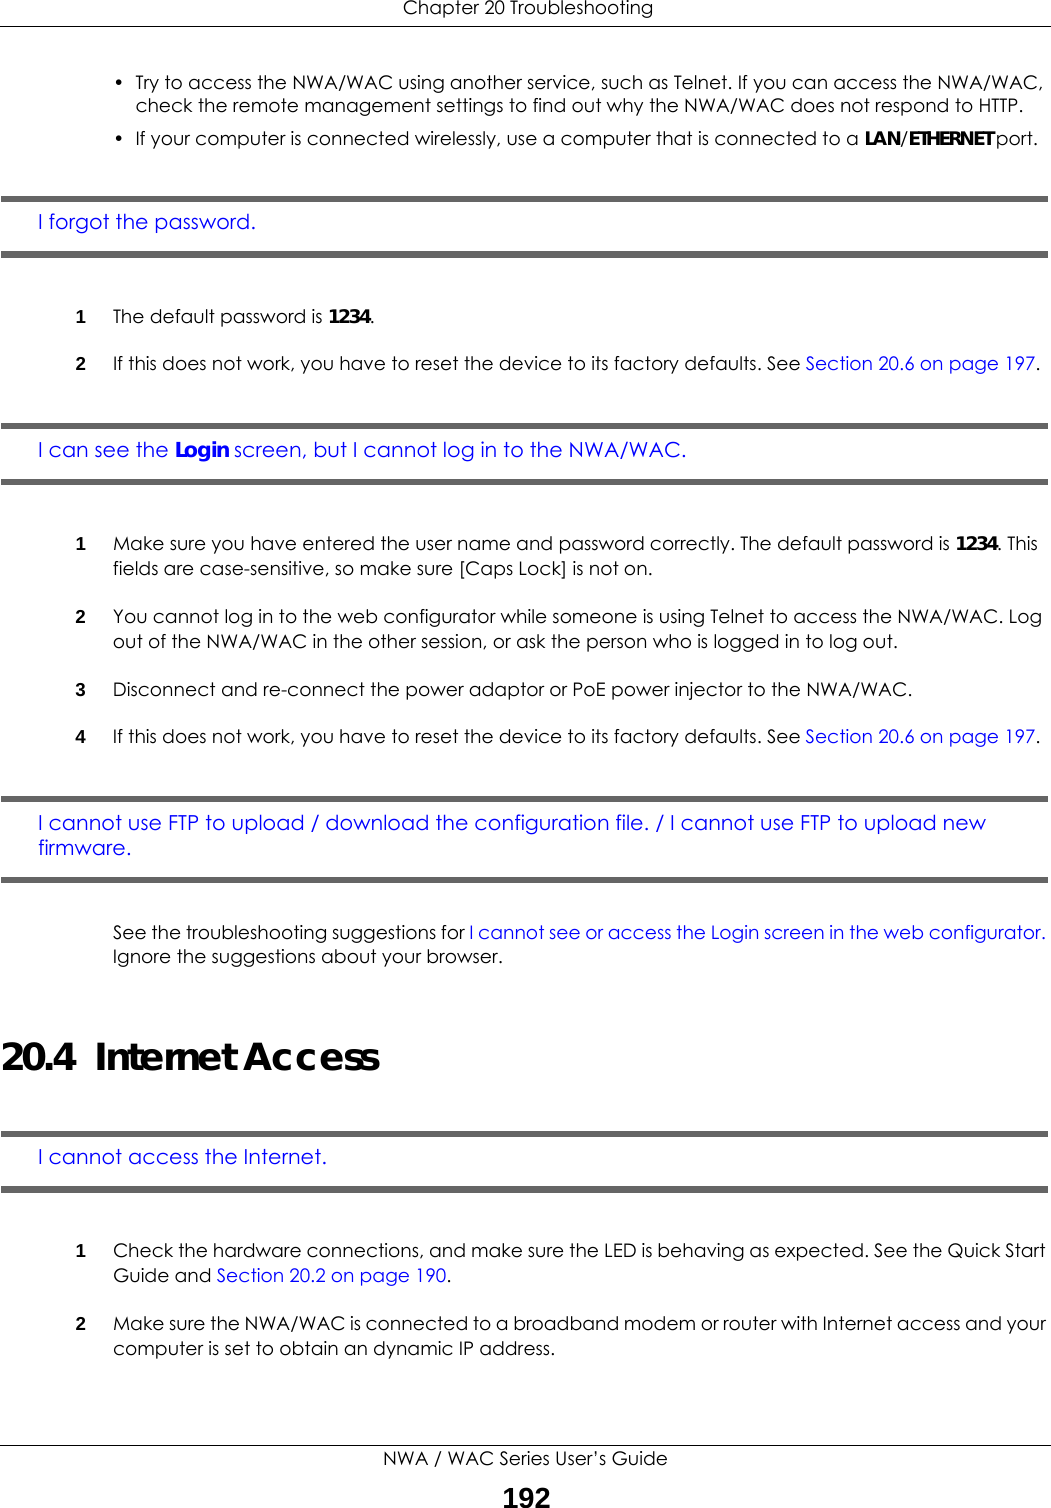  Chapter 20 TroubleshootingNWA / WAC Series User’s Guide192• Try to access the NWA/WAC using another service, such as Telnet. If you can access the NWA/WAC, check the remote management settings to find out why the NWA/WAC does not respond to HTTP. • If your computer is connected wirelessly, use a computer that is connected to a LAN/ETHERNET port.I forgot the password.1The default password is 1234.2If this does not work, you have to reset the device to its factory defaults. See Section 20.6 on page 197.I can see the Login screen, but I cannot log in to the NWA/WAC.1Make sure you have entered the user name and password correctly. The default password is 1234. This fields are case-sensitive, so make sure [Caps Lock] is not on.2You cannot log in to the web configurator while someone is using Telnet to access the NWA/WAC. Log out of the NWA/WAC in the other session, or ask the person who is logged in to log out.3Disconnect and re-connect the power adaptor or PoE power injector to the NWA/WAC. 4If this does not work, you have to reset the device to its factory defaults. See Section 20.6 on page 197.I cannot use FTP to upload / download the configuration file. / I cannot use FTP to upload new firmware. See the troubleshooting suggestions for I cannot see or access the Login screen in the web configurator. Ignore the suggestions about your browser.20.4  Internet AccessI cannot access the Internet.1Check the hardware connections, and make sure the LED is behaving as expected. See the Quick Start Guide and Section 20.2 on page 190.2Make sure the NWA/WAC is connected to a broadband modem or router with Internet access and your computer is set to obtain an dynamic IP address.